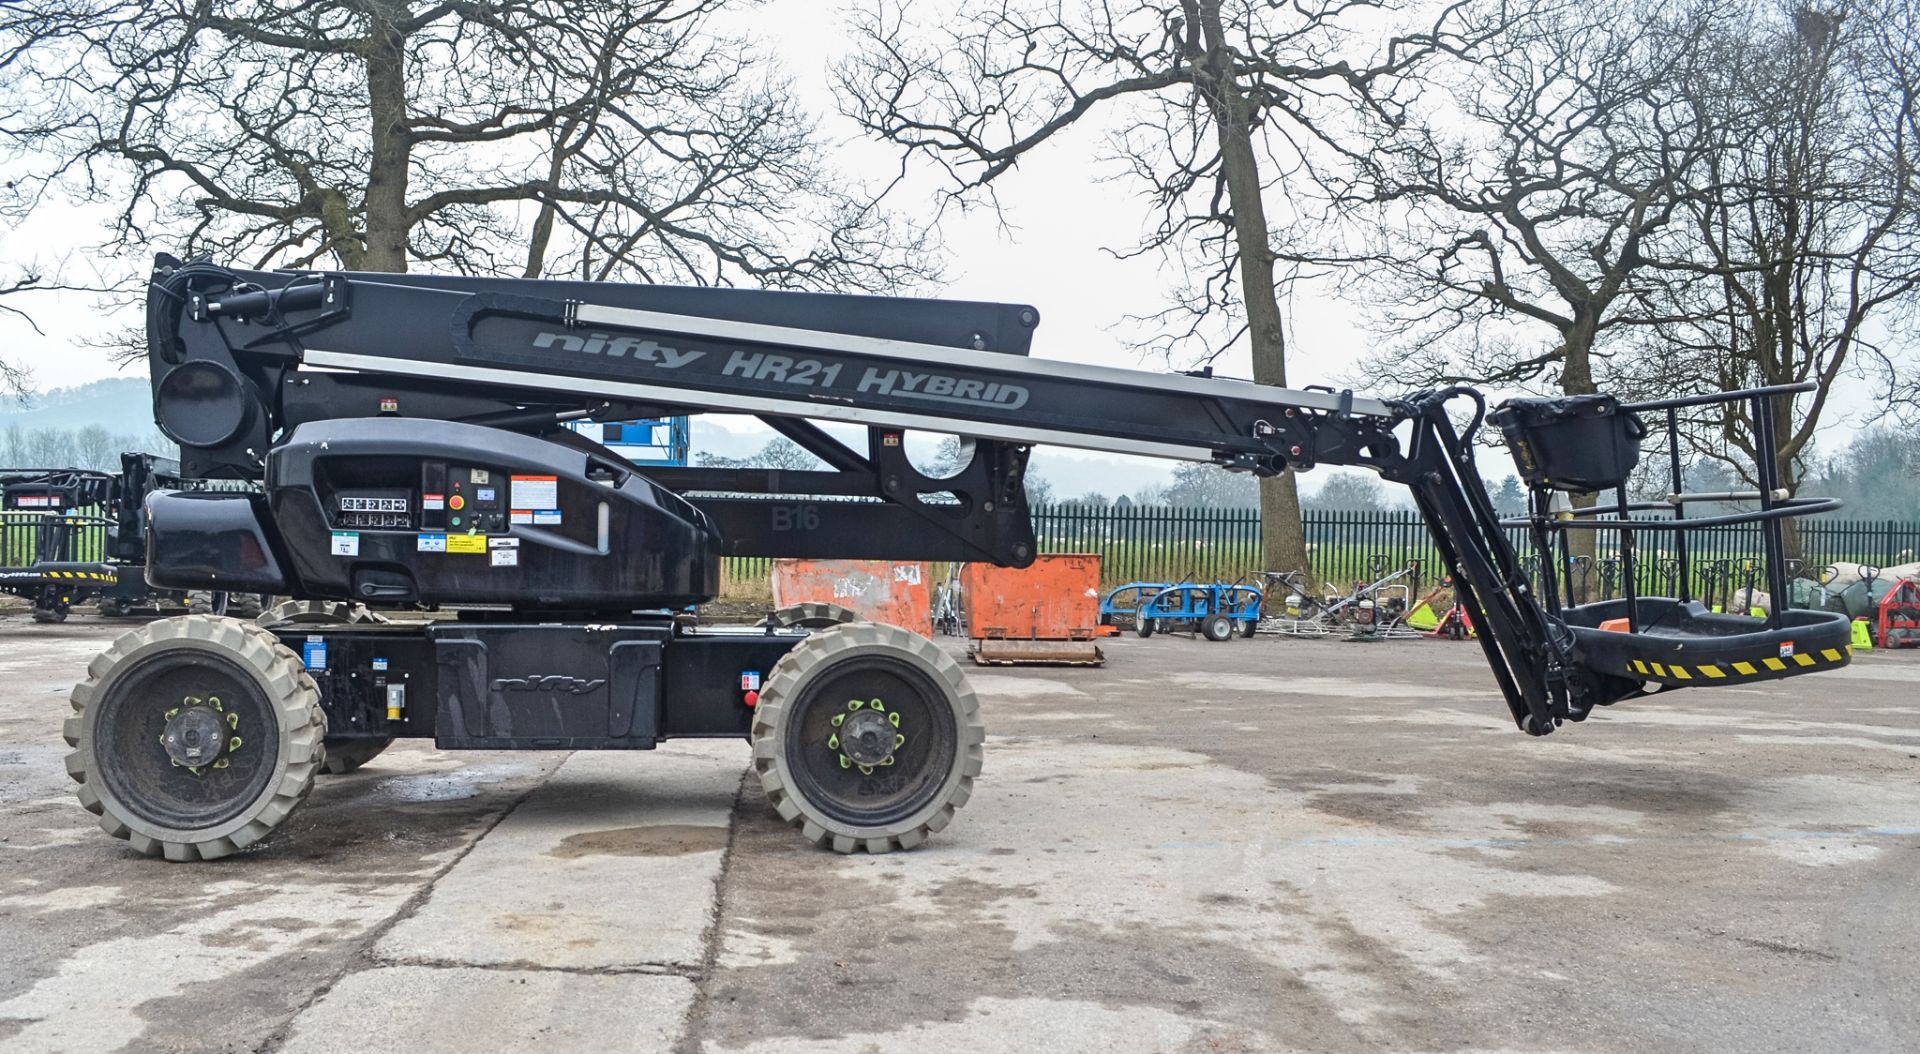 Nifty H21 Hybrid diesel/battery electric 4x4 rough terrain articulated boom lift access platform - Image 8 of 22